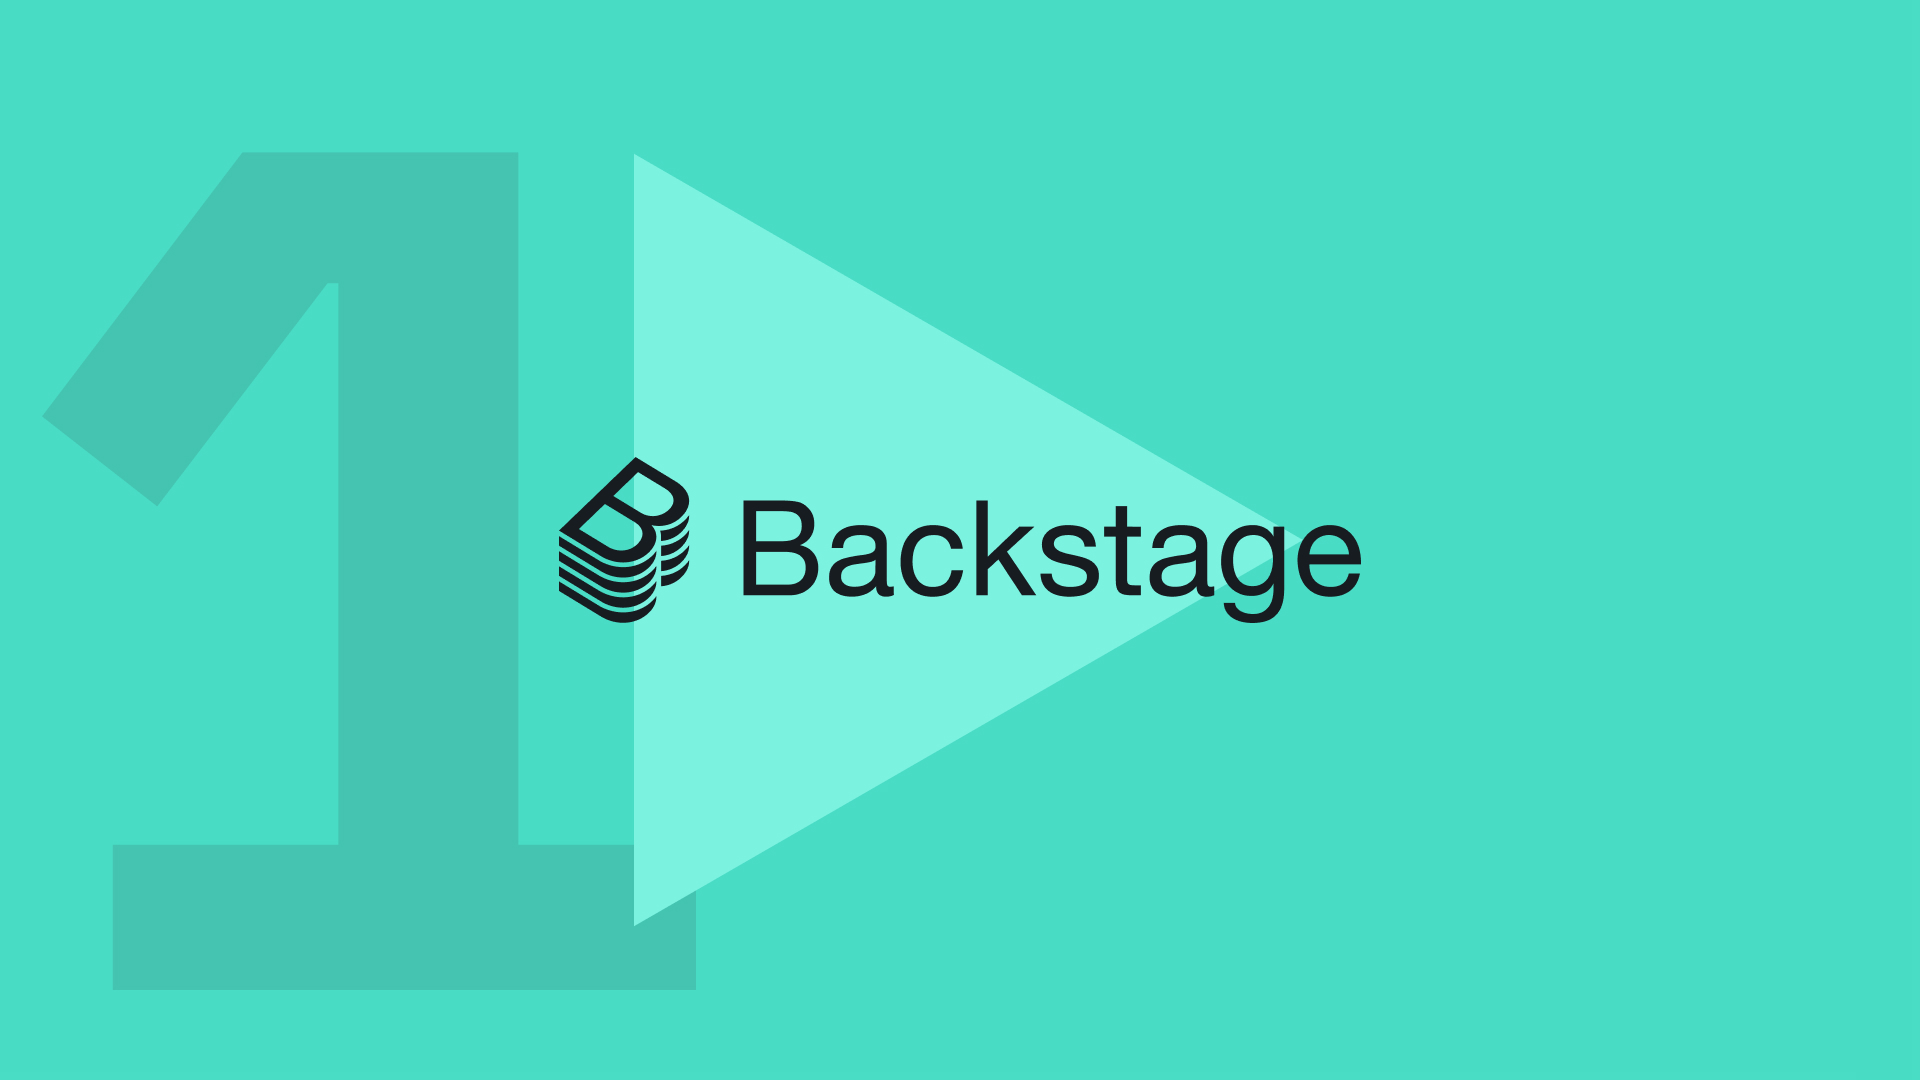 Backstage: Getting started